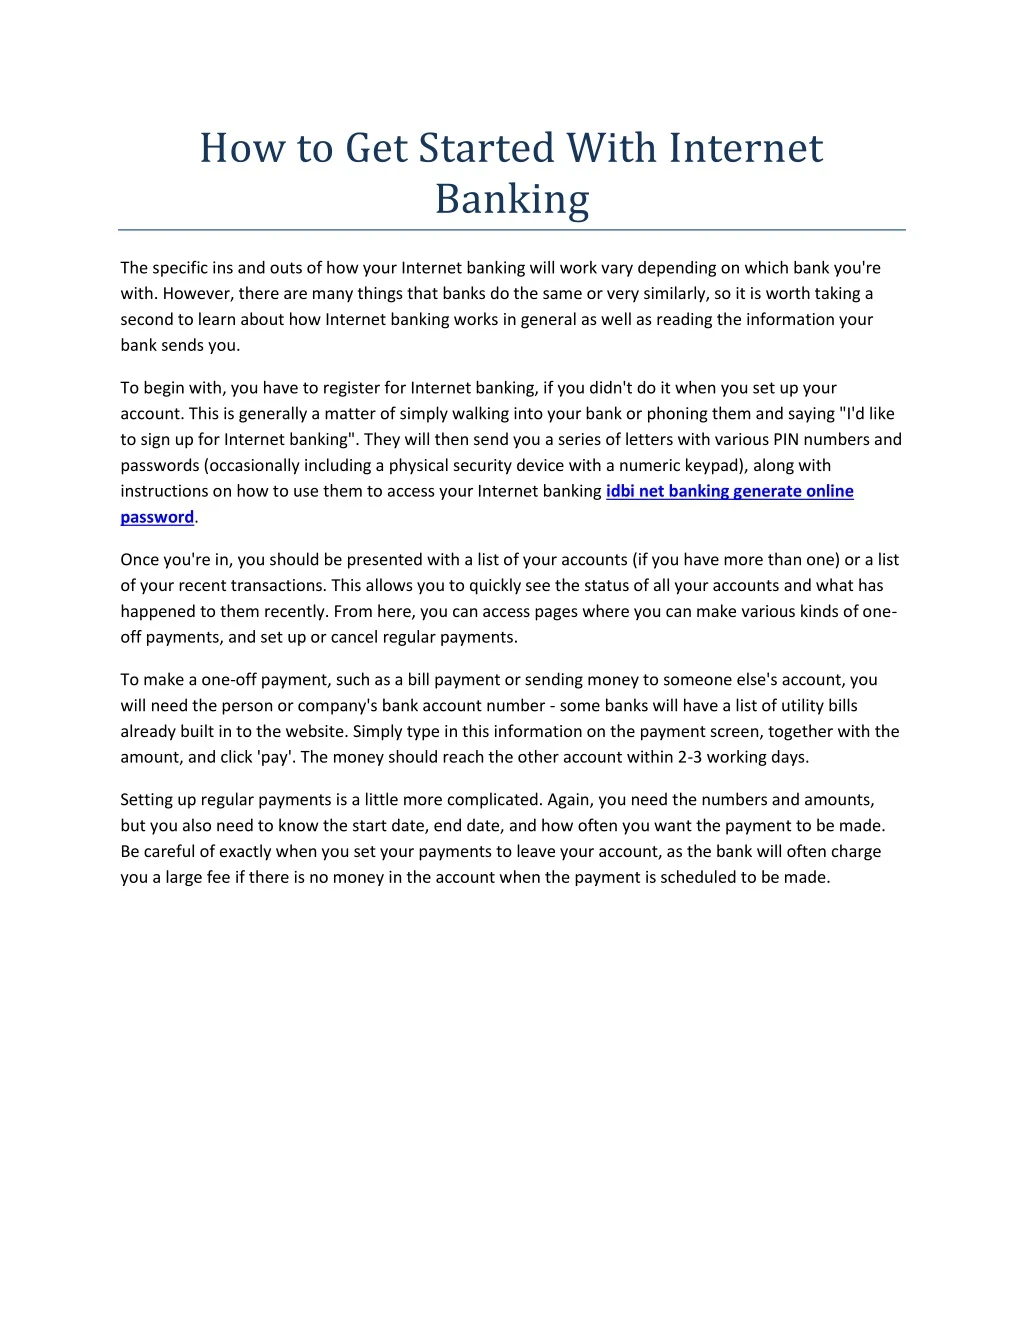 how to get started with internet banking